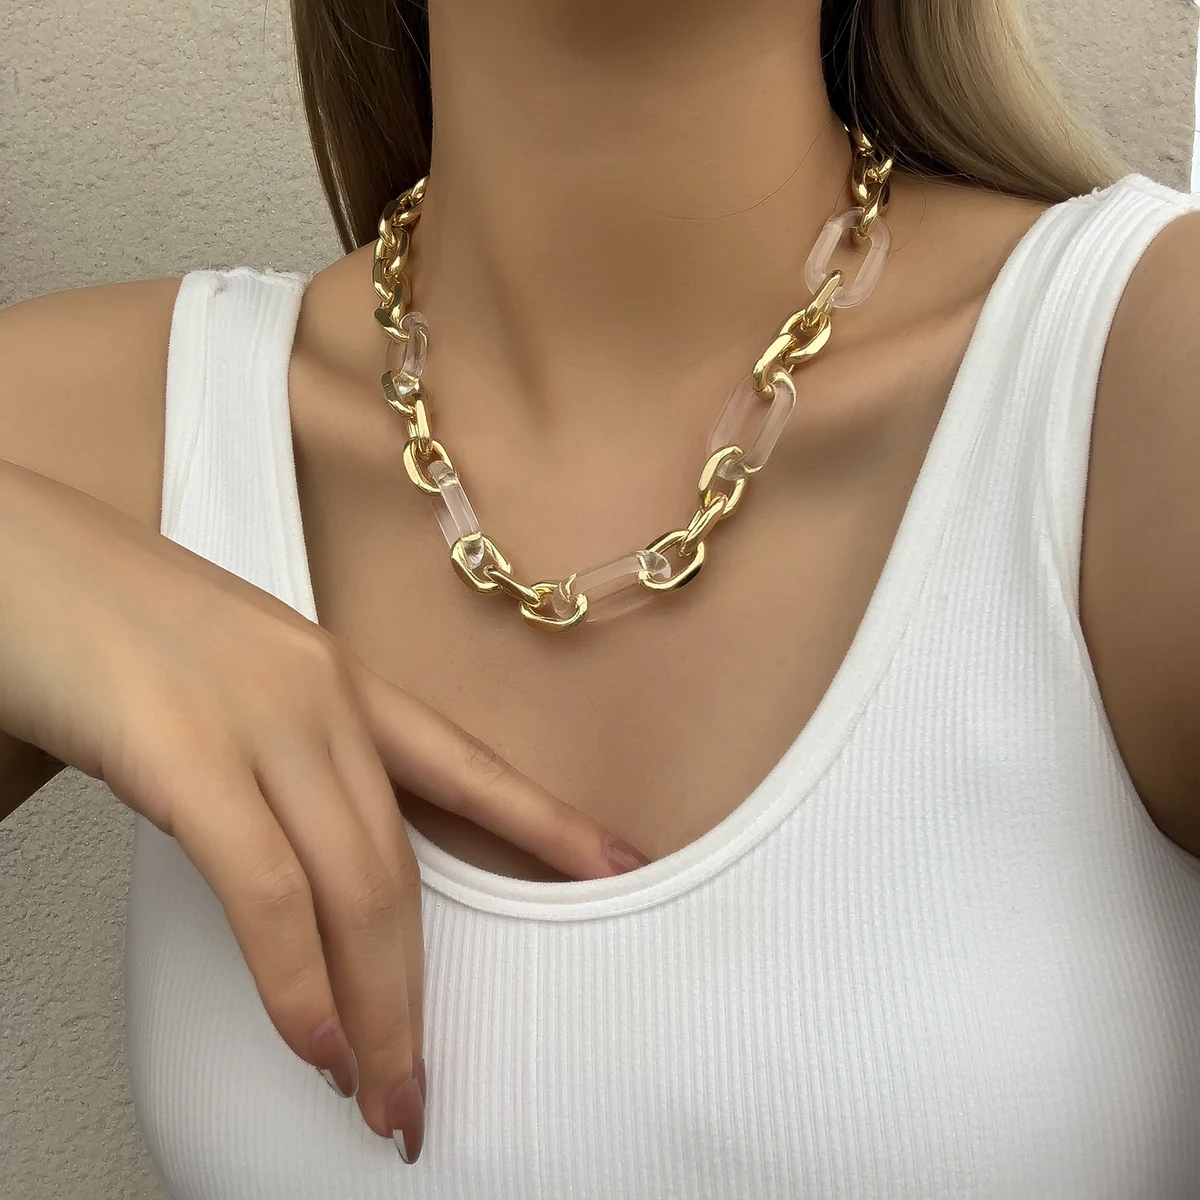 

Lifefontier Exaggerated Hip Hop Chunky Curb Chain Necklace Statement Cuban Twist Alloy Acrylic Choker Necklace Steampunk Jewelry